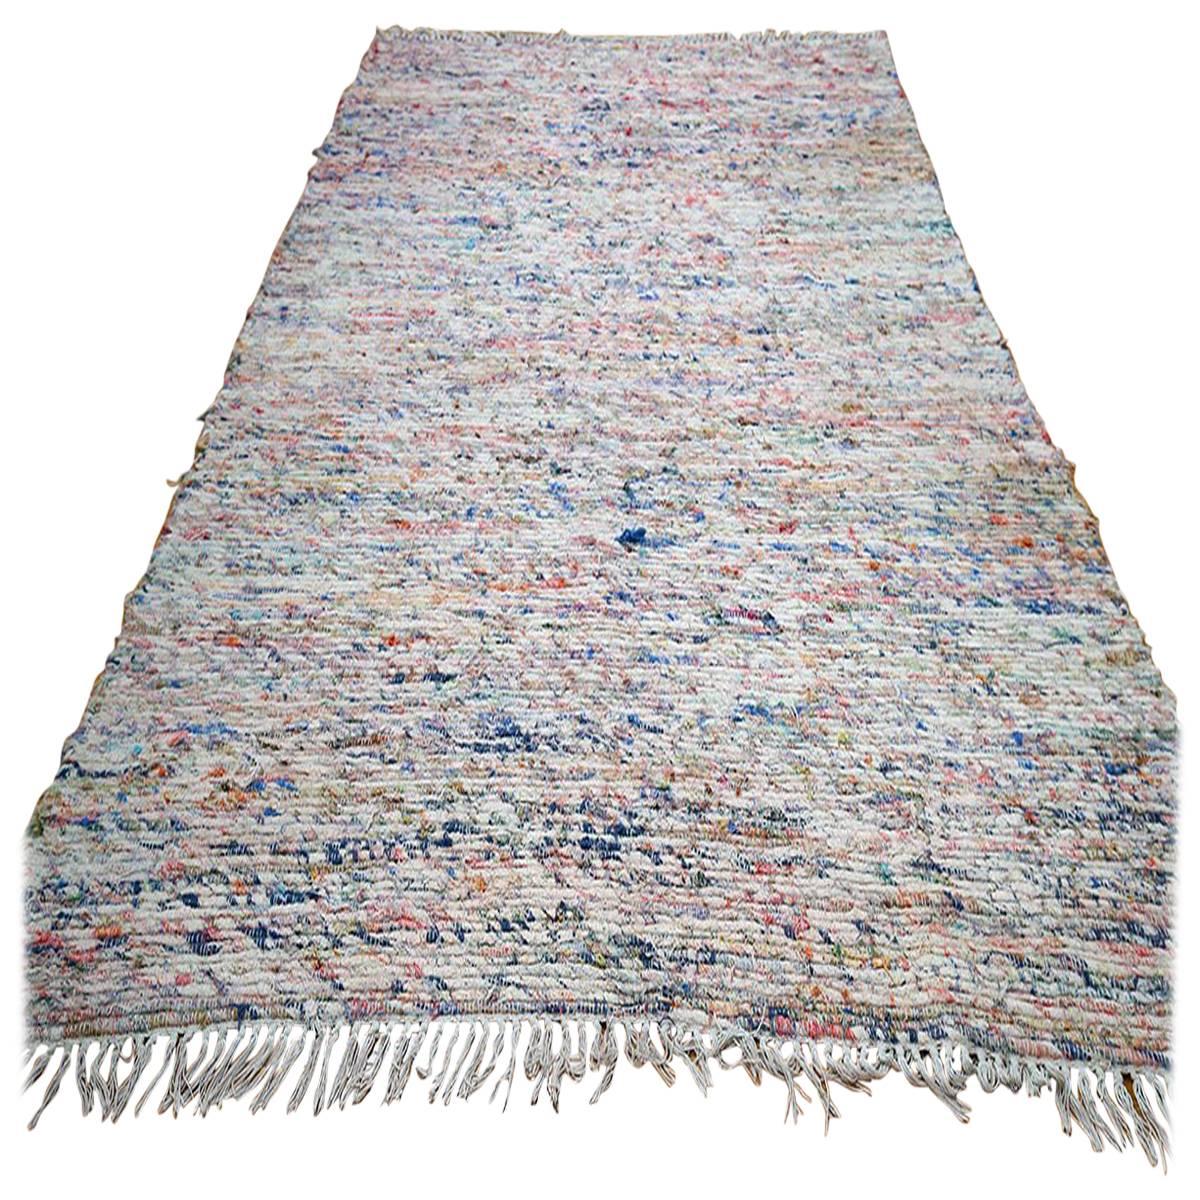 Extremely Rare Rag Rug Formerly Owned by the British Actress Jean Simmons